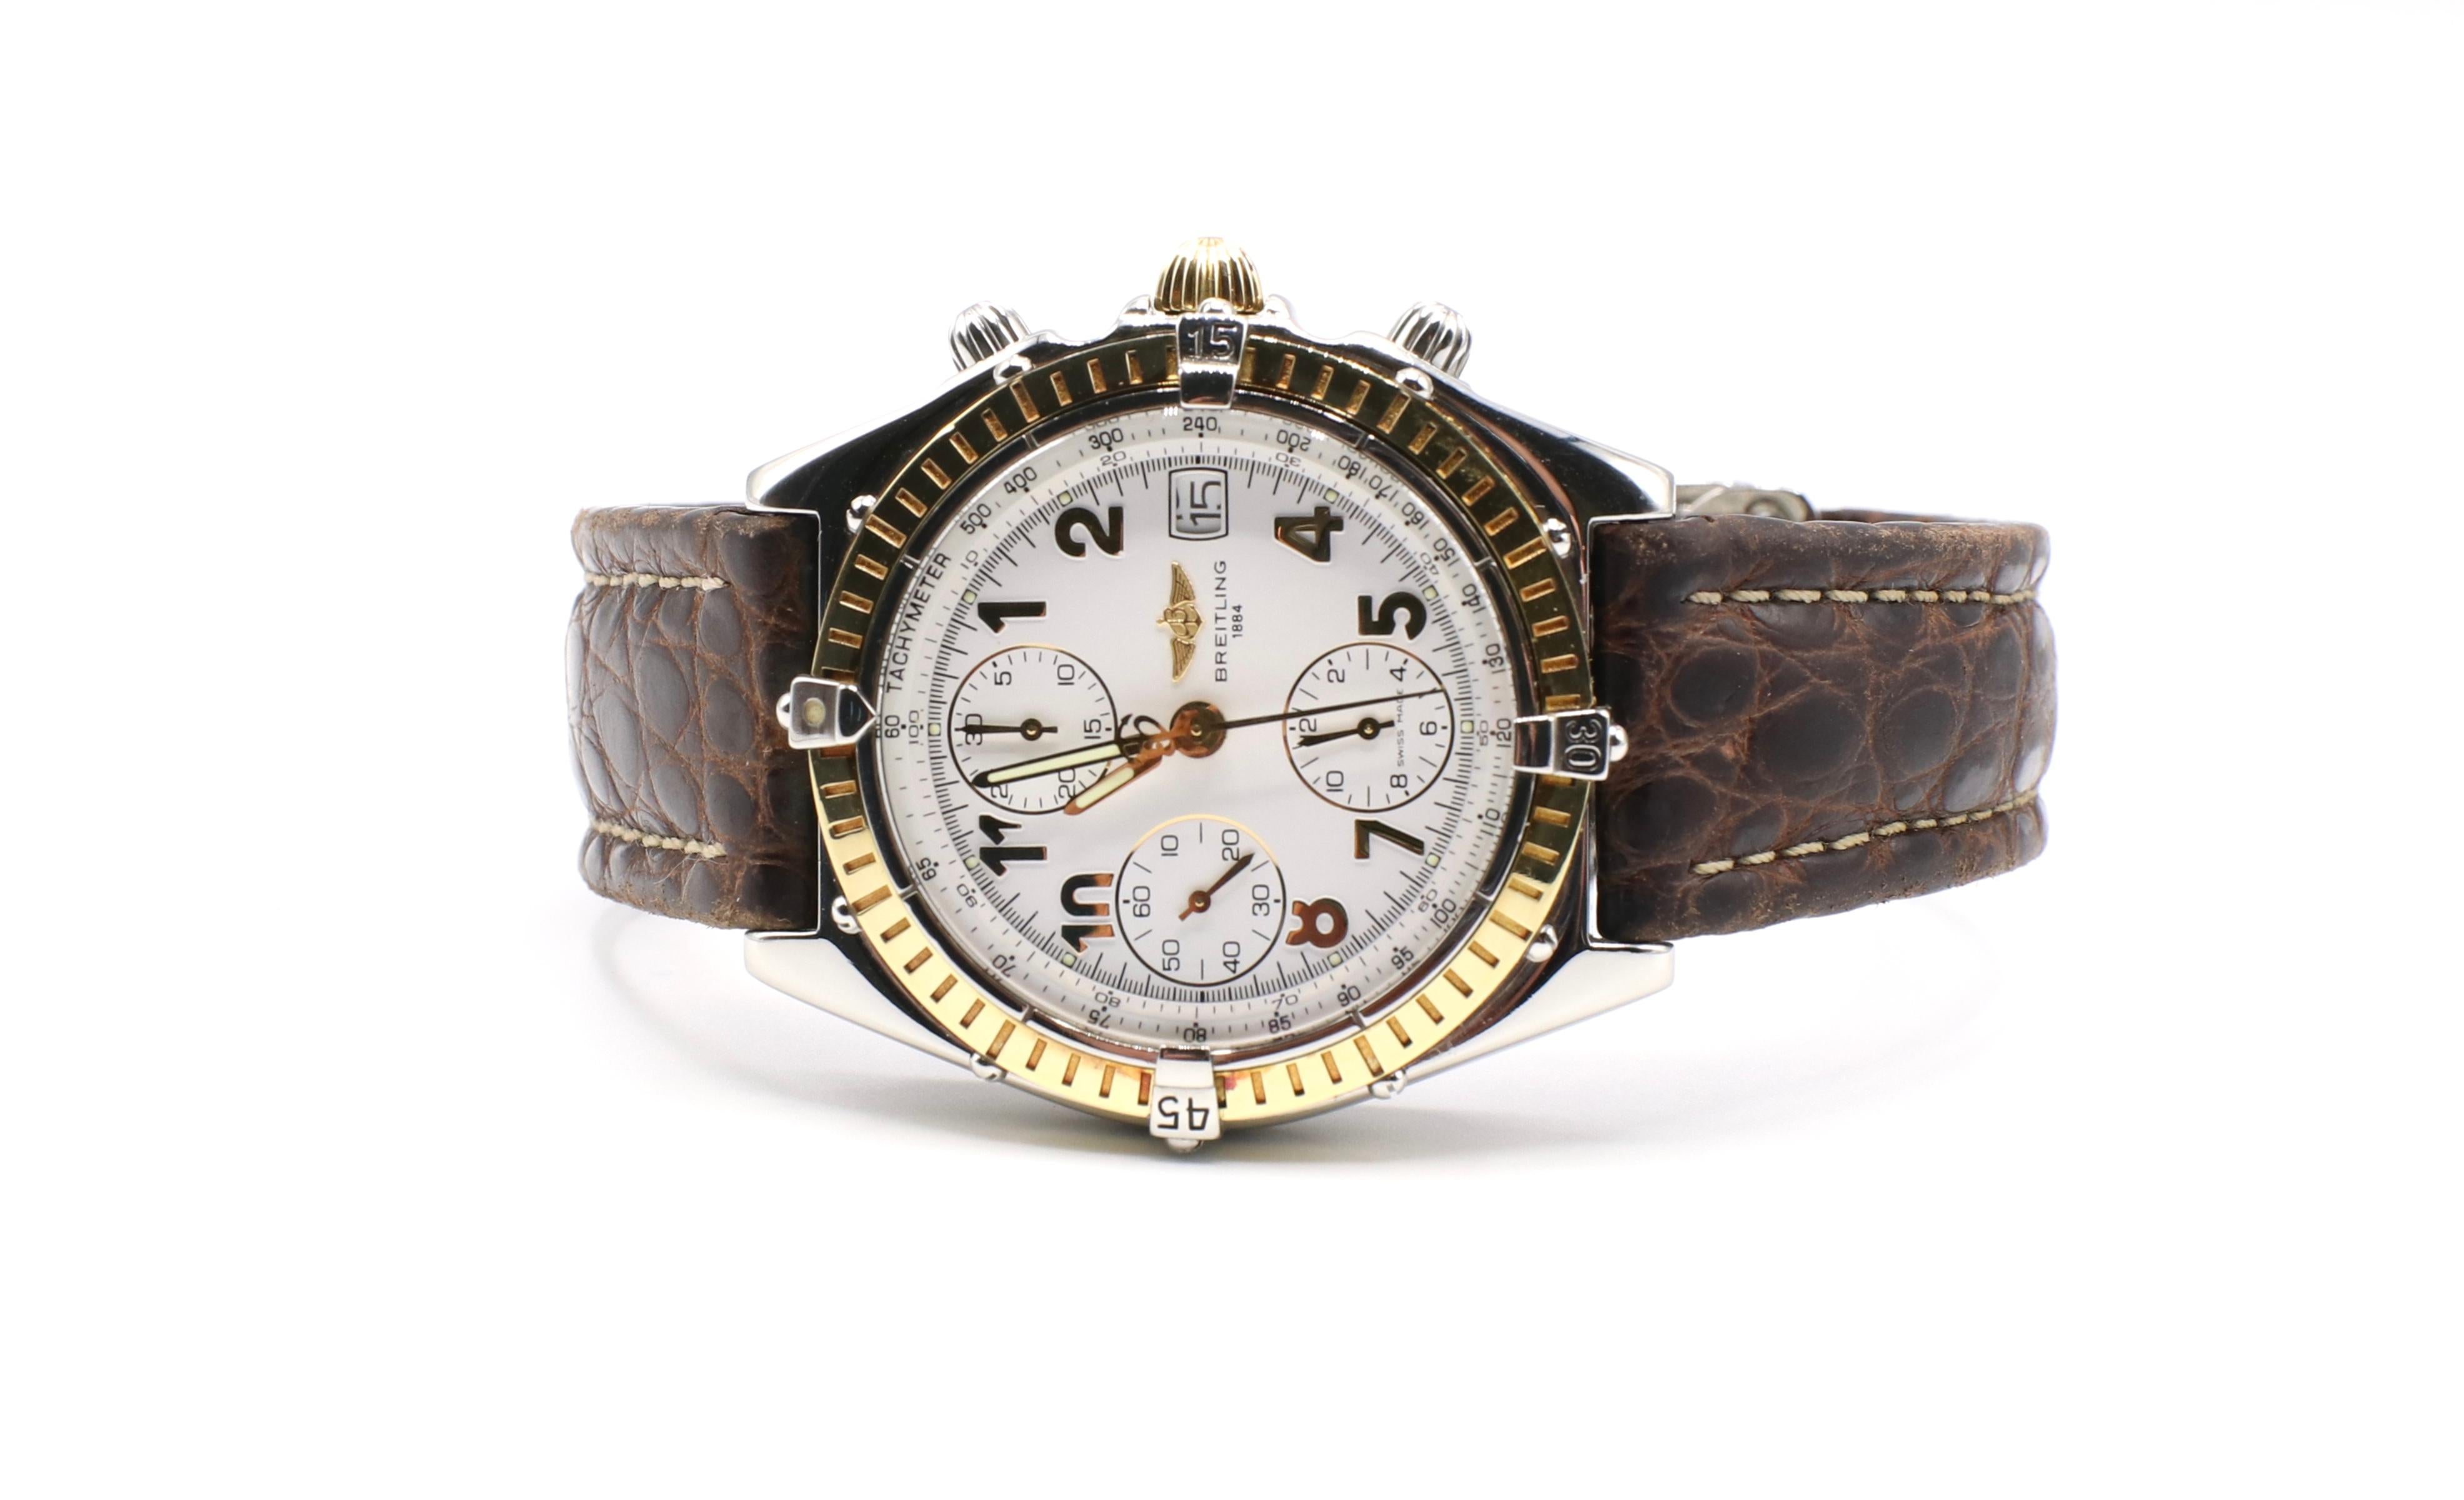 Vintage Breitling Chronomat B13050.1 Automatic Stainless Steel & 18K Gold Watch Leather Strap

Model: 13050.1
Serial: 148***
Movement: Automatic 
Metal: 18k yellow gold & stainless steel
Case: 39mm
Strap: Brown alligator leather strap, worn as shown